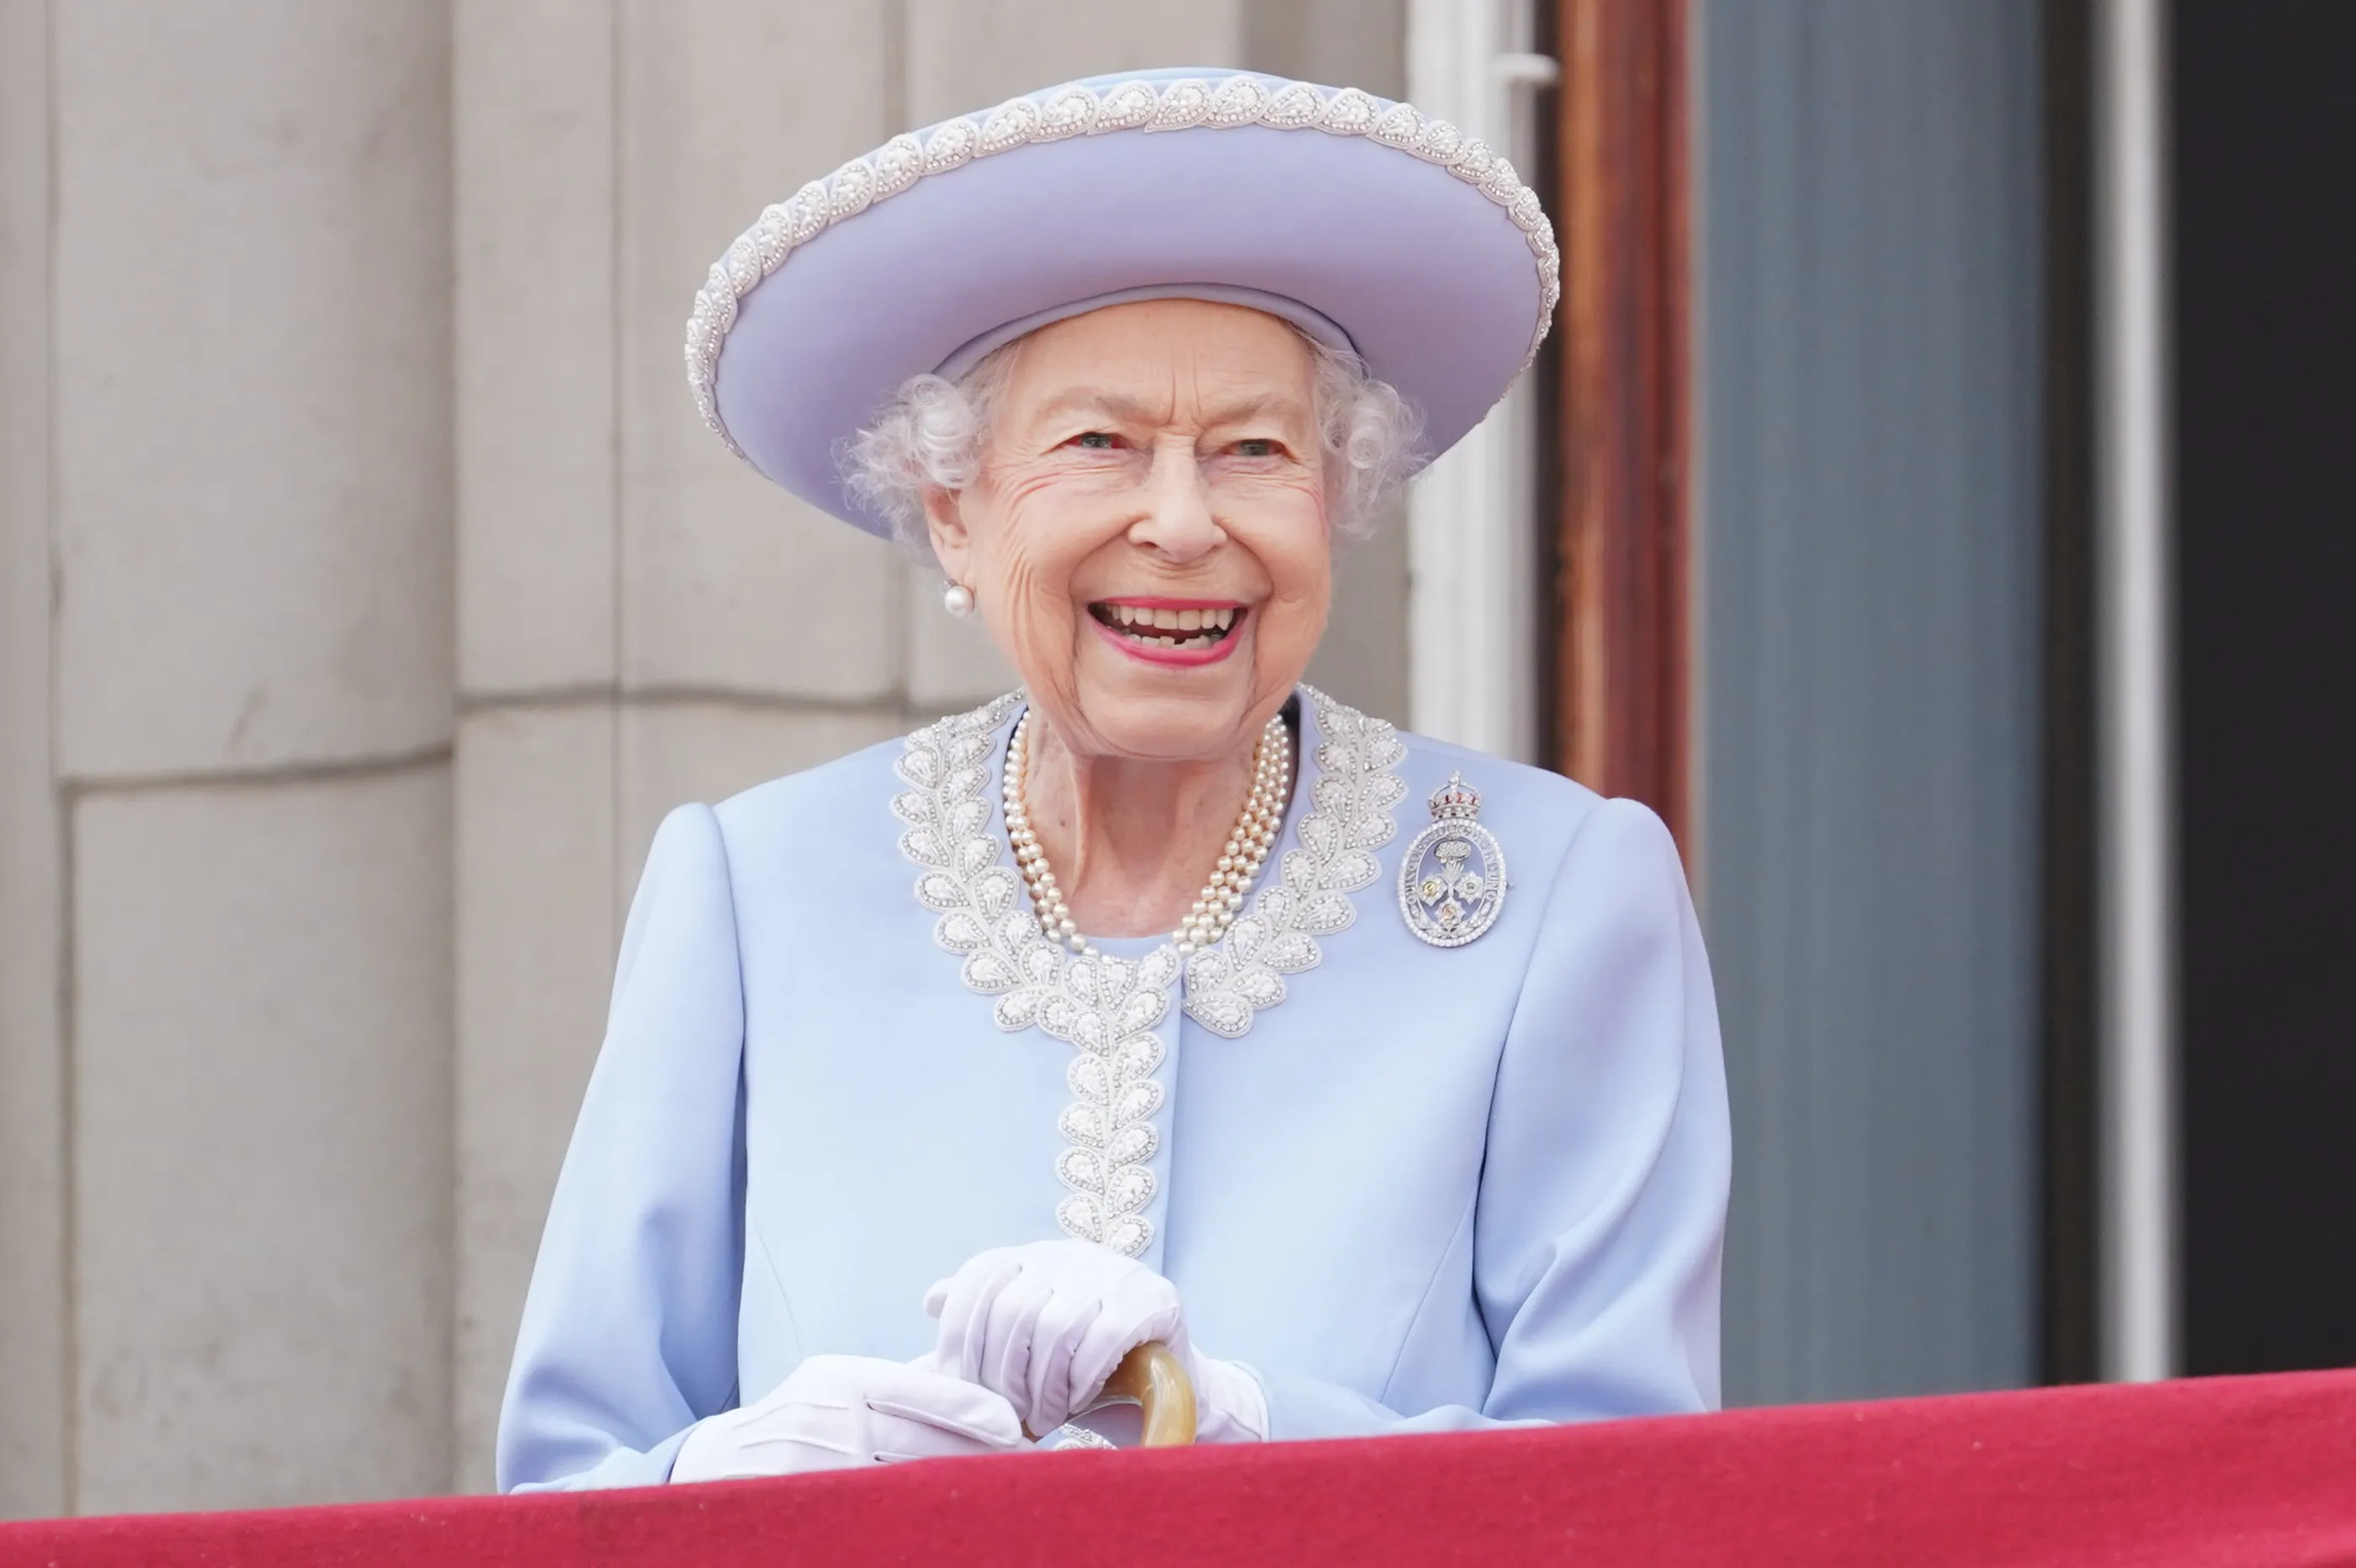 Queen Elizabeth standing in the Buckingham Palace balcony during her Platinum Jubilee celebration